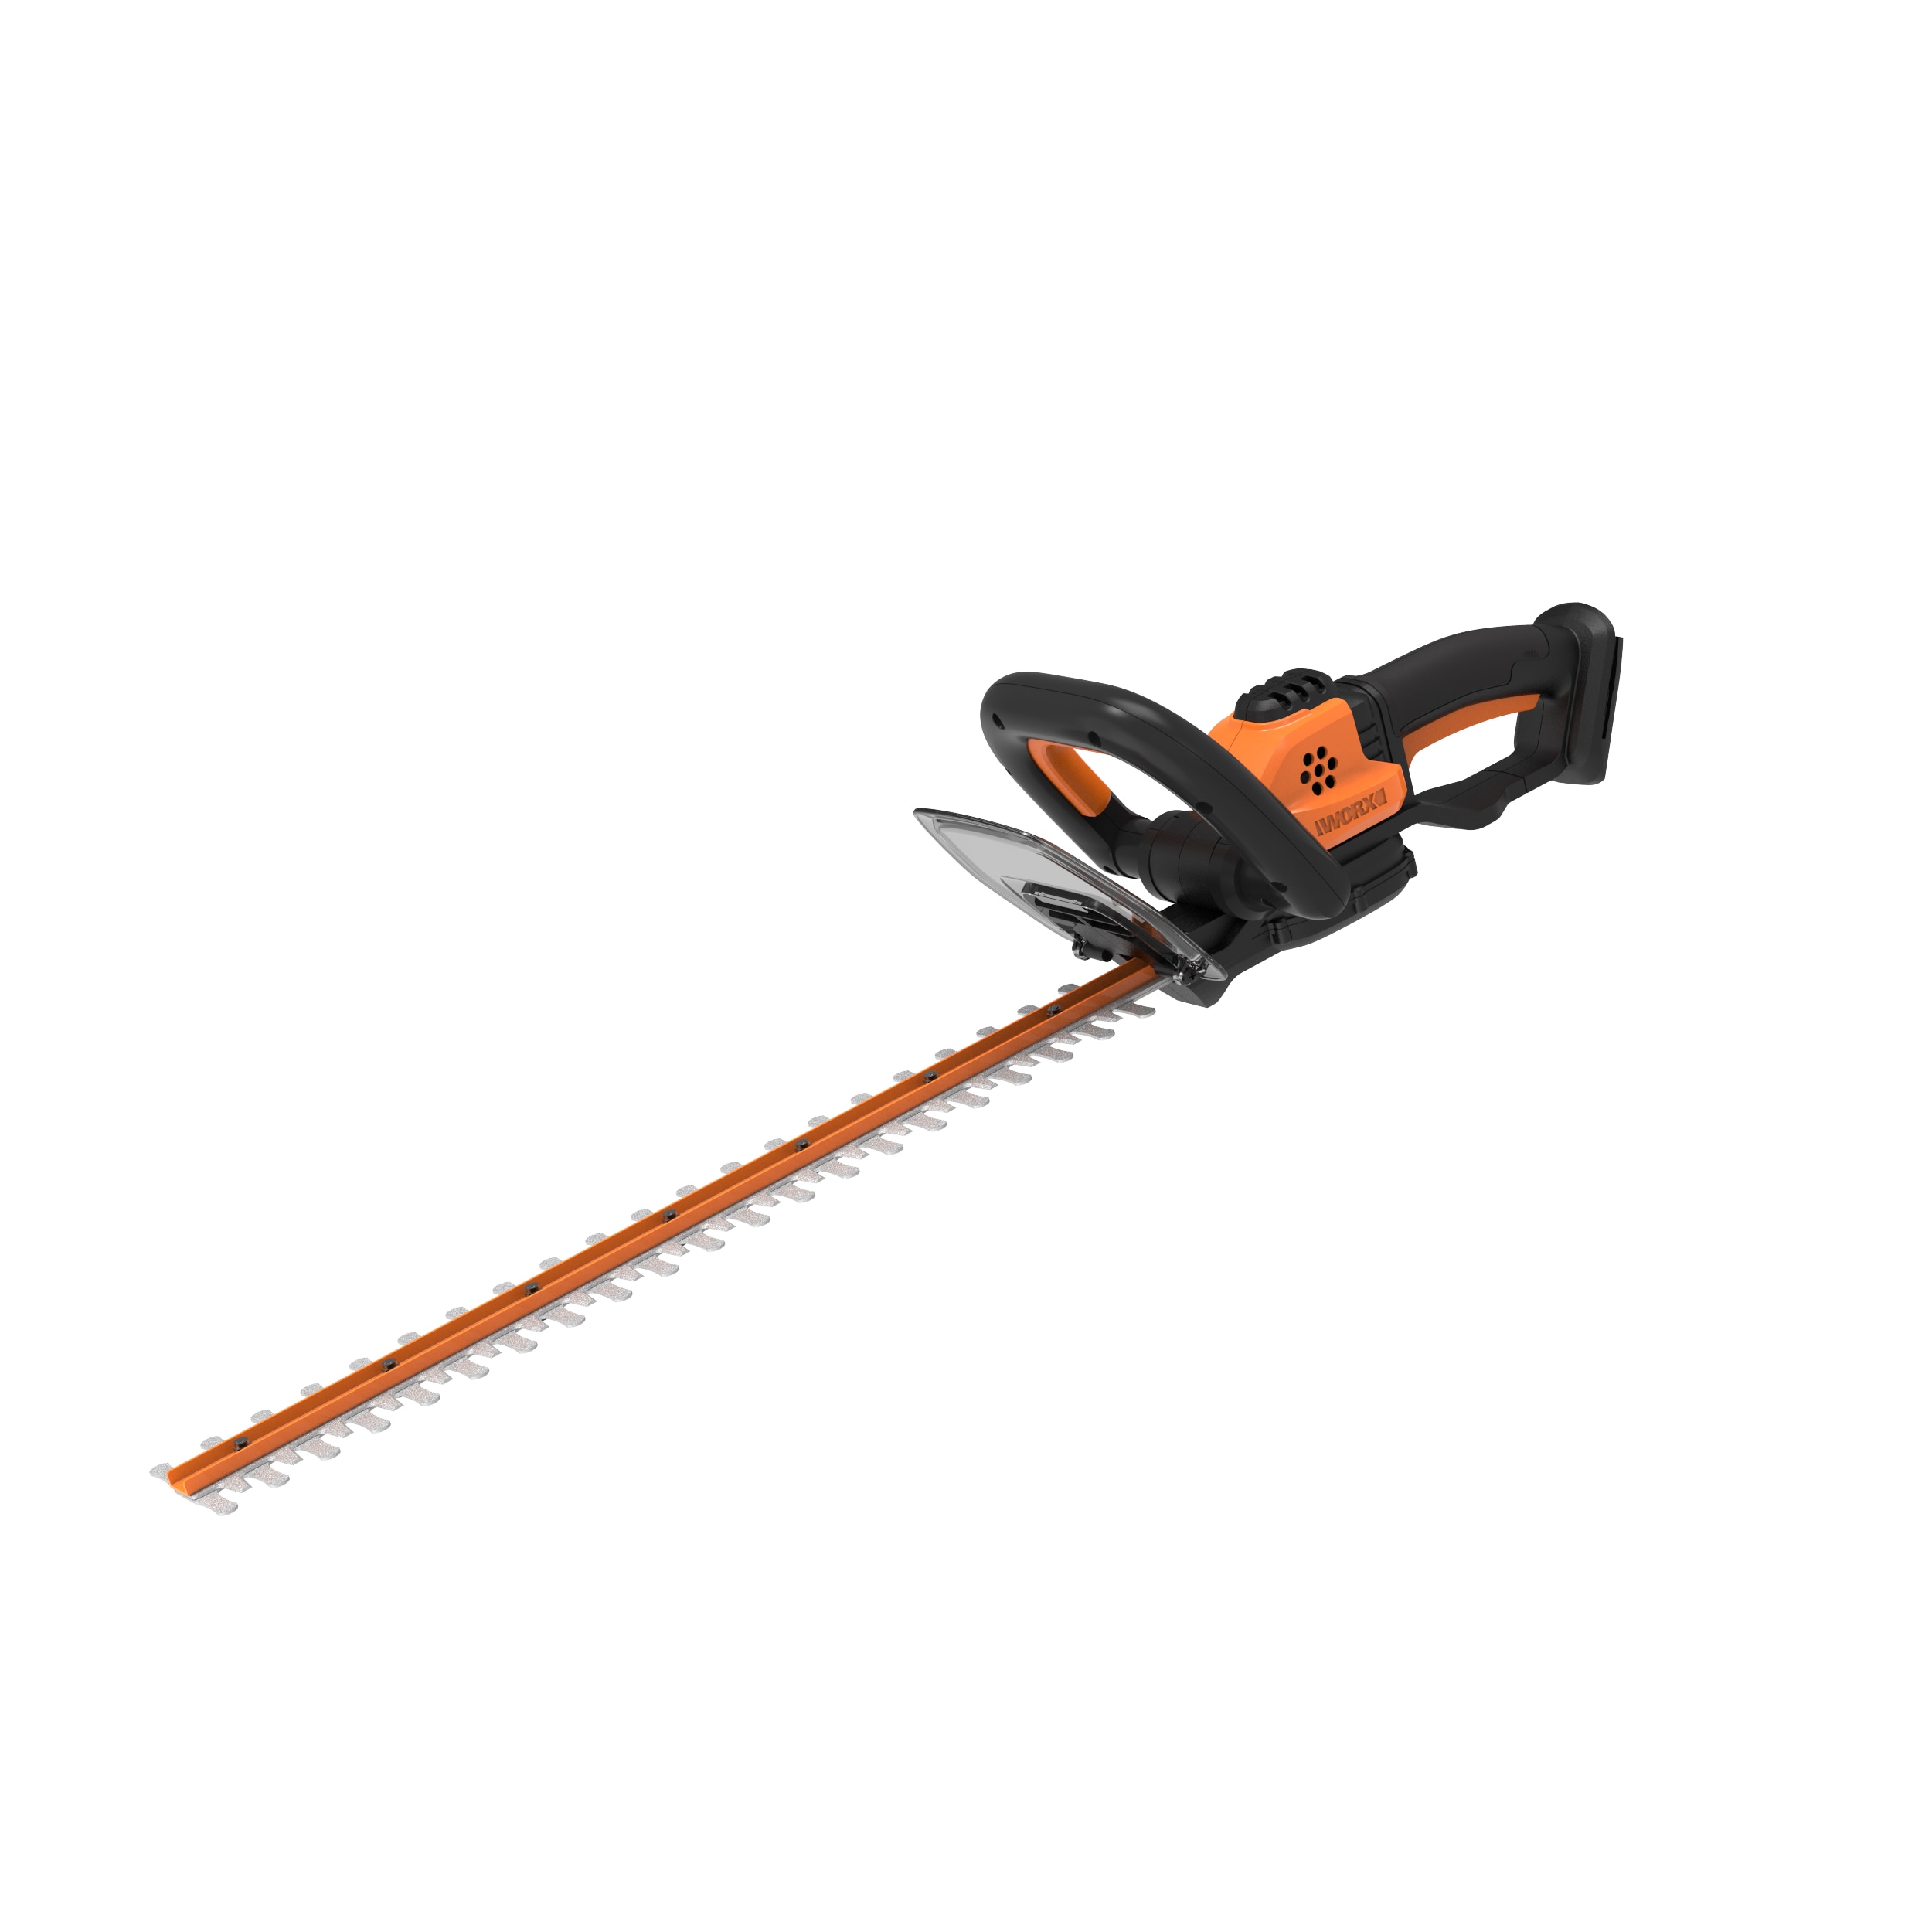 Necessities aflevere Dag WORX POWER SHARE 20-volt 22-in Dual Battery Hedge Trimmer 2 Ah (Battery &  Charger Included) in the Hedge Trimmers department at Lowes.com